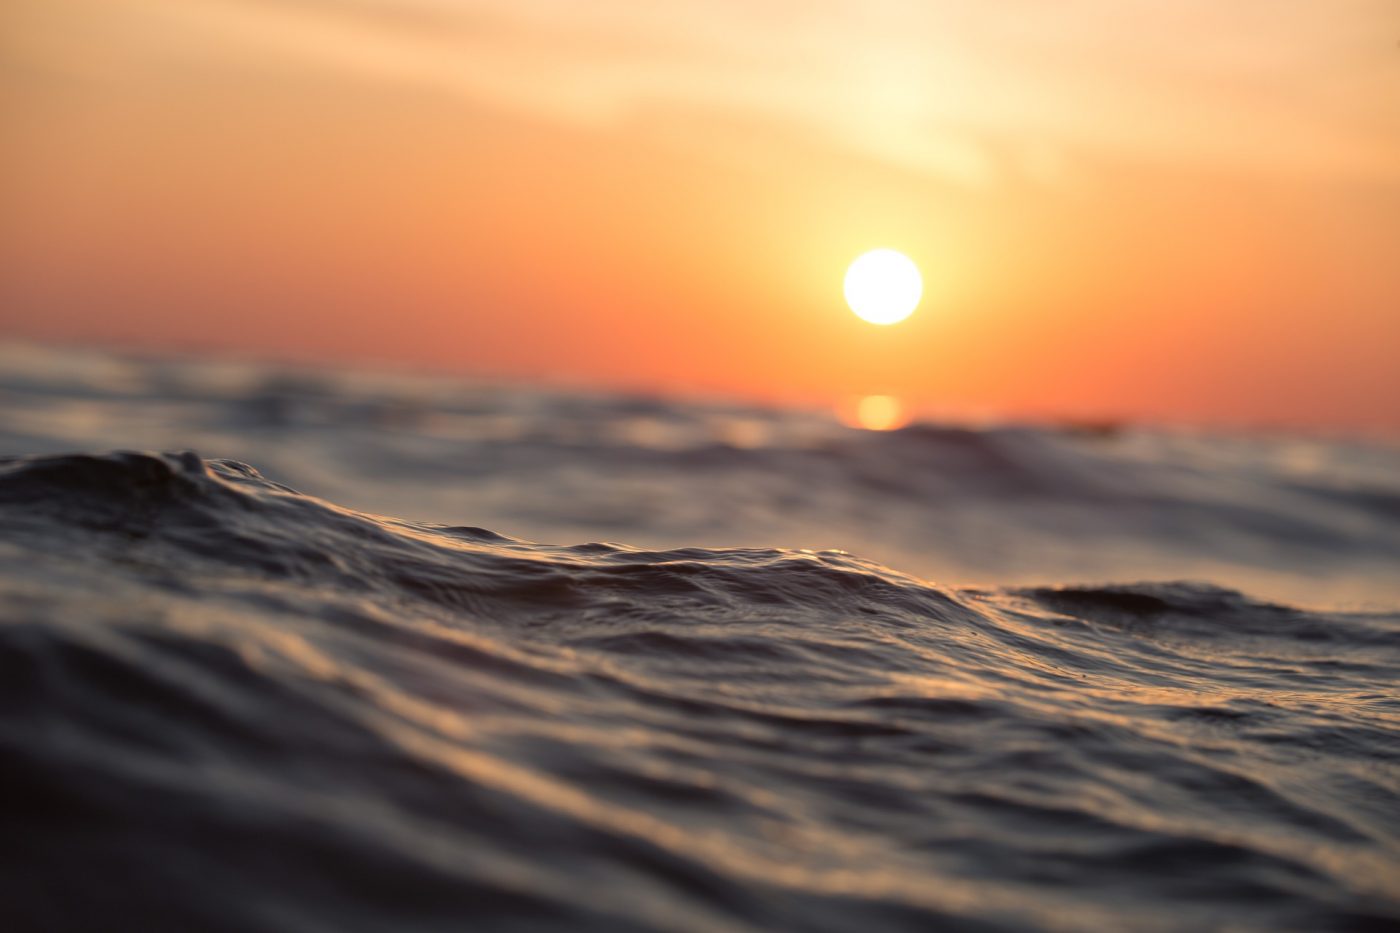 Ocean Surface and Sunset